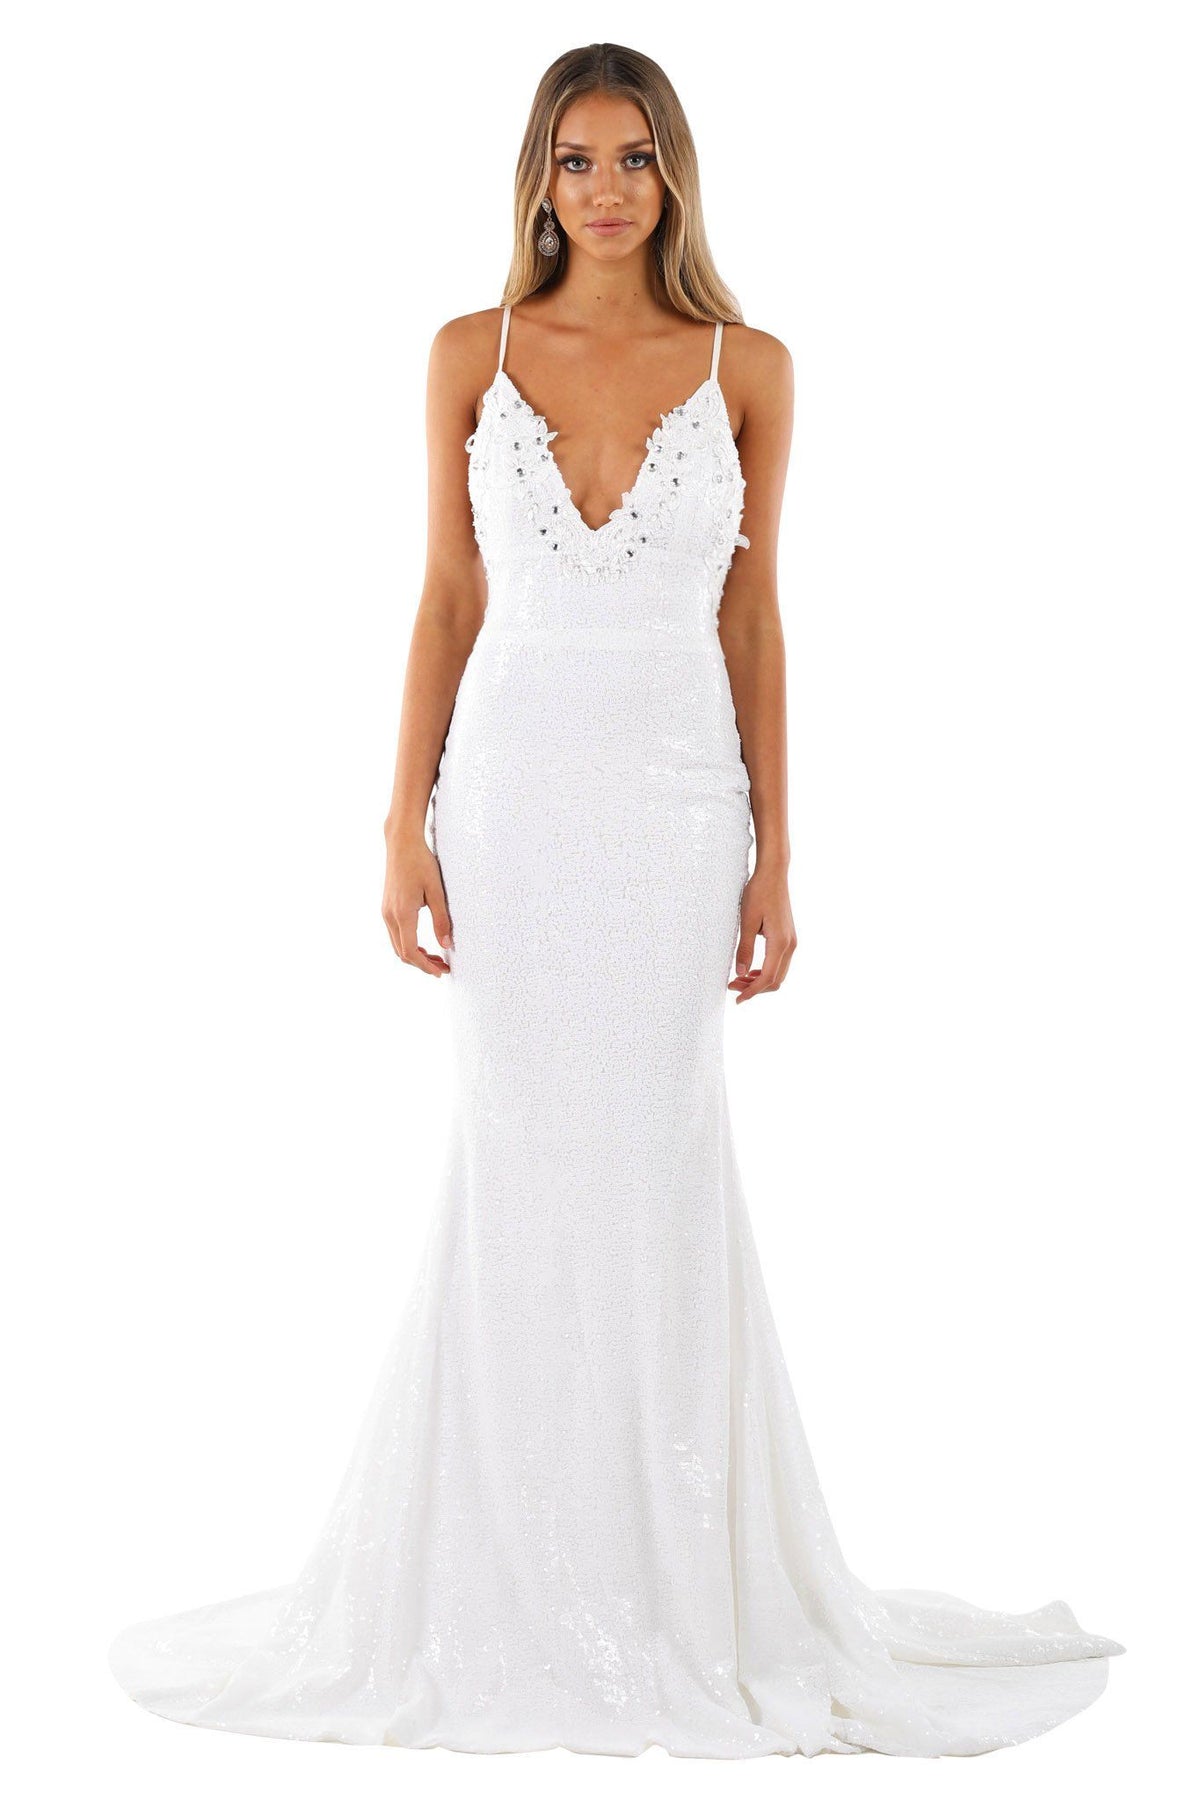 White Sequin Sleeveless Evening Gown features plunging neckline, thin shoulder straps, V backless design, fitted bodice to the knees then the skirt flares out in a mermaid style with a long train